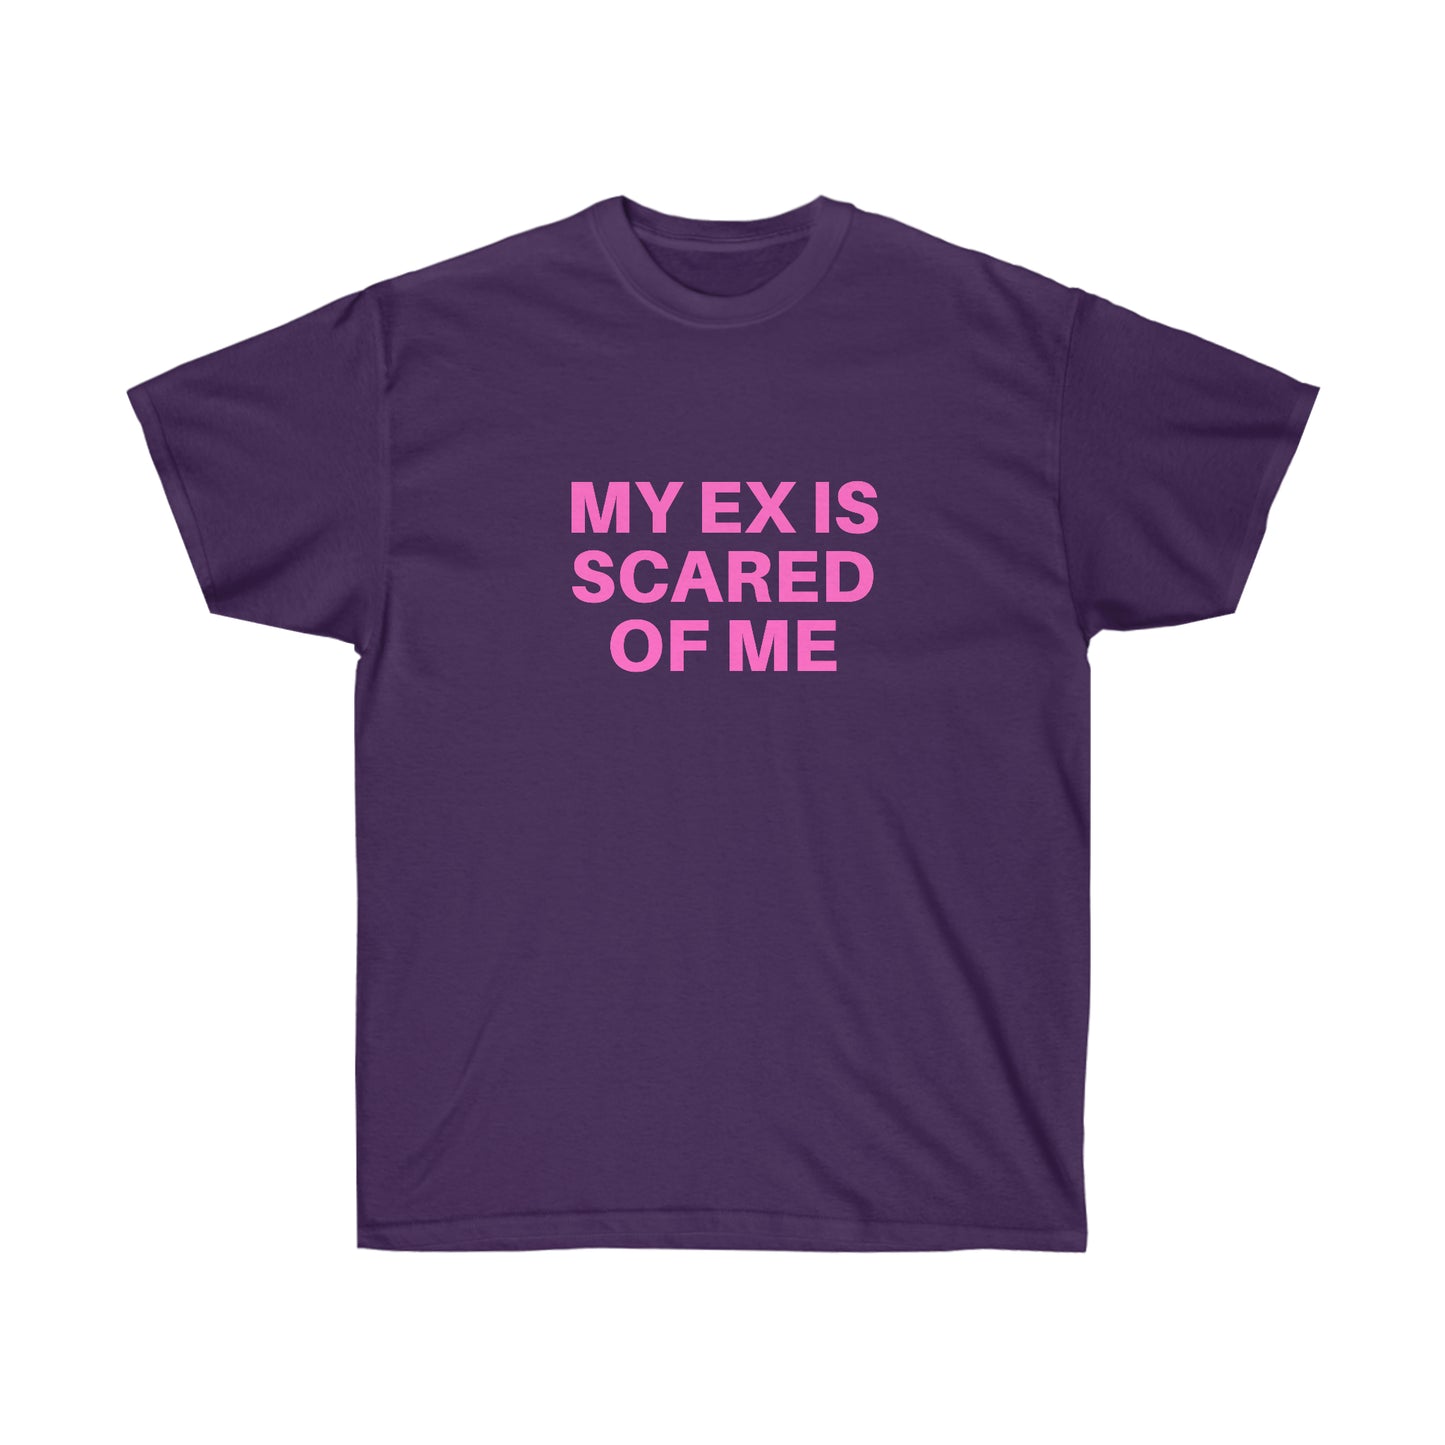 My ex is scared of me | Tee